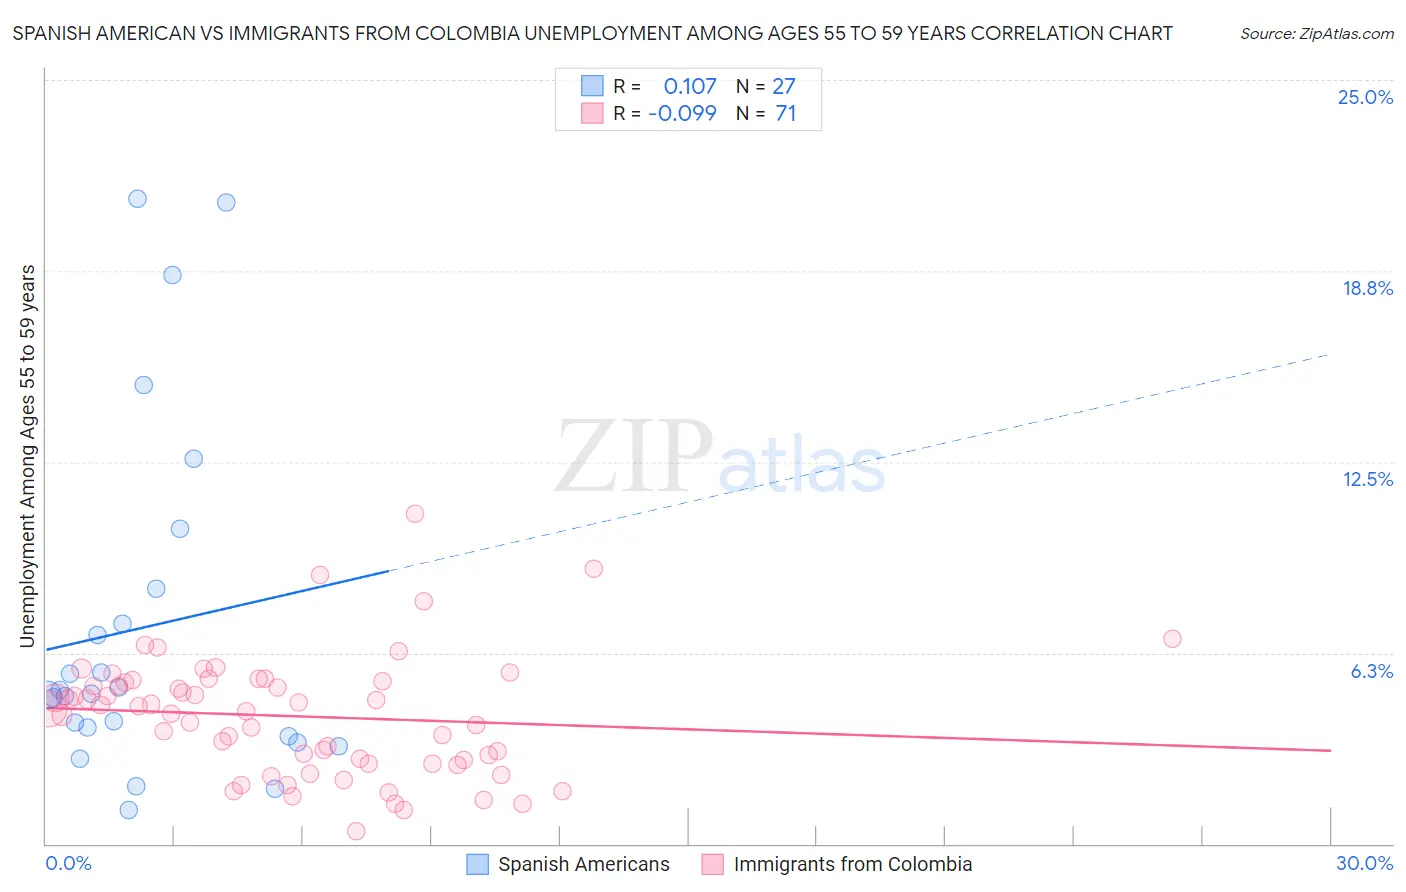 Spanish American vs Immigrants from Colombia Unemployment Among Ages 55 to 59 years